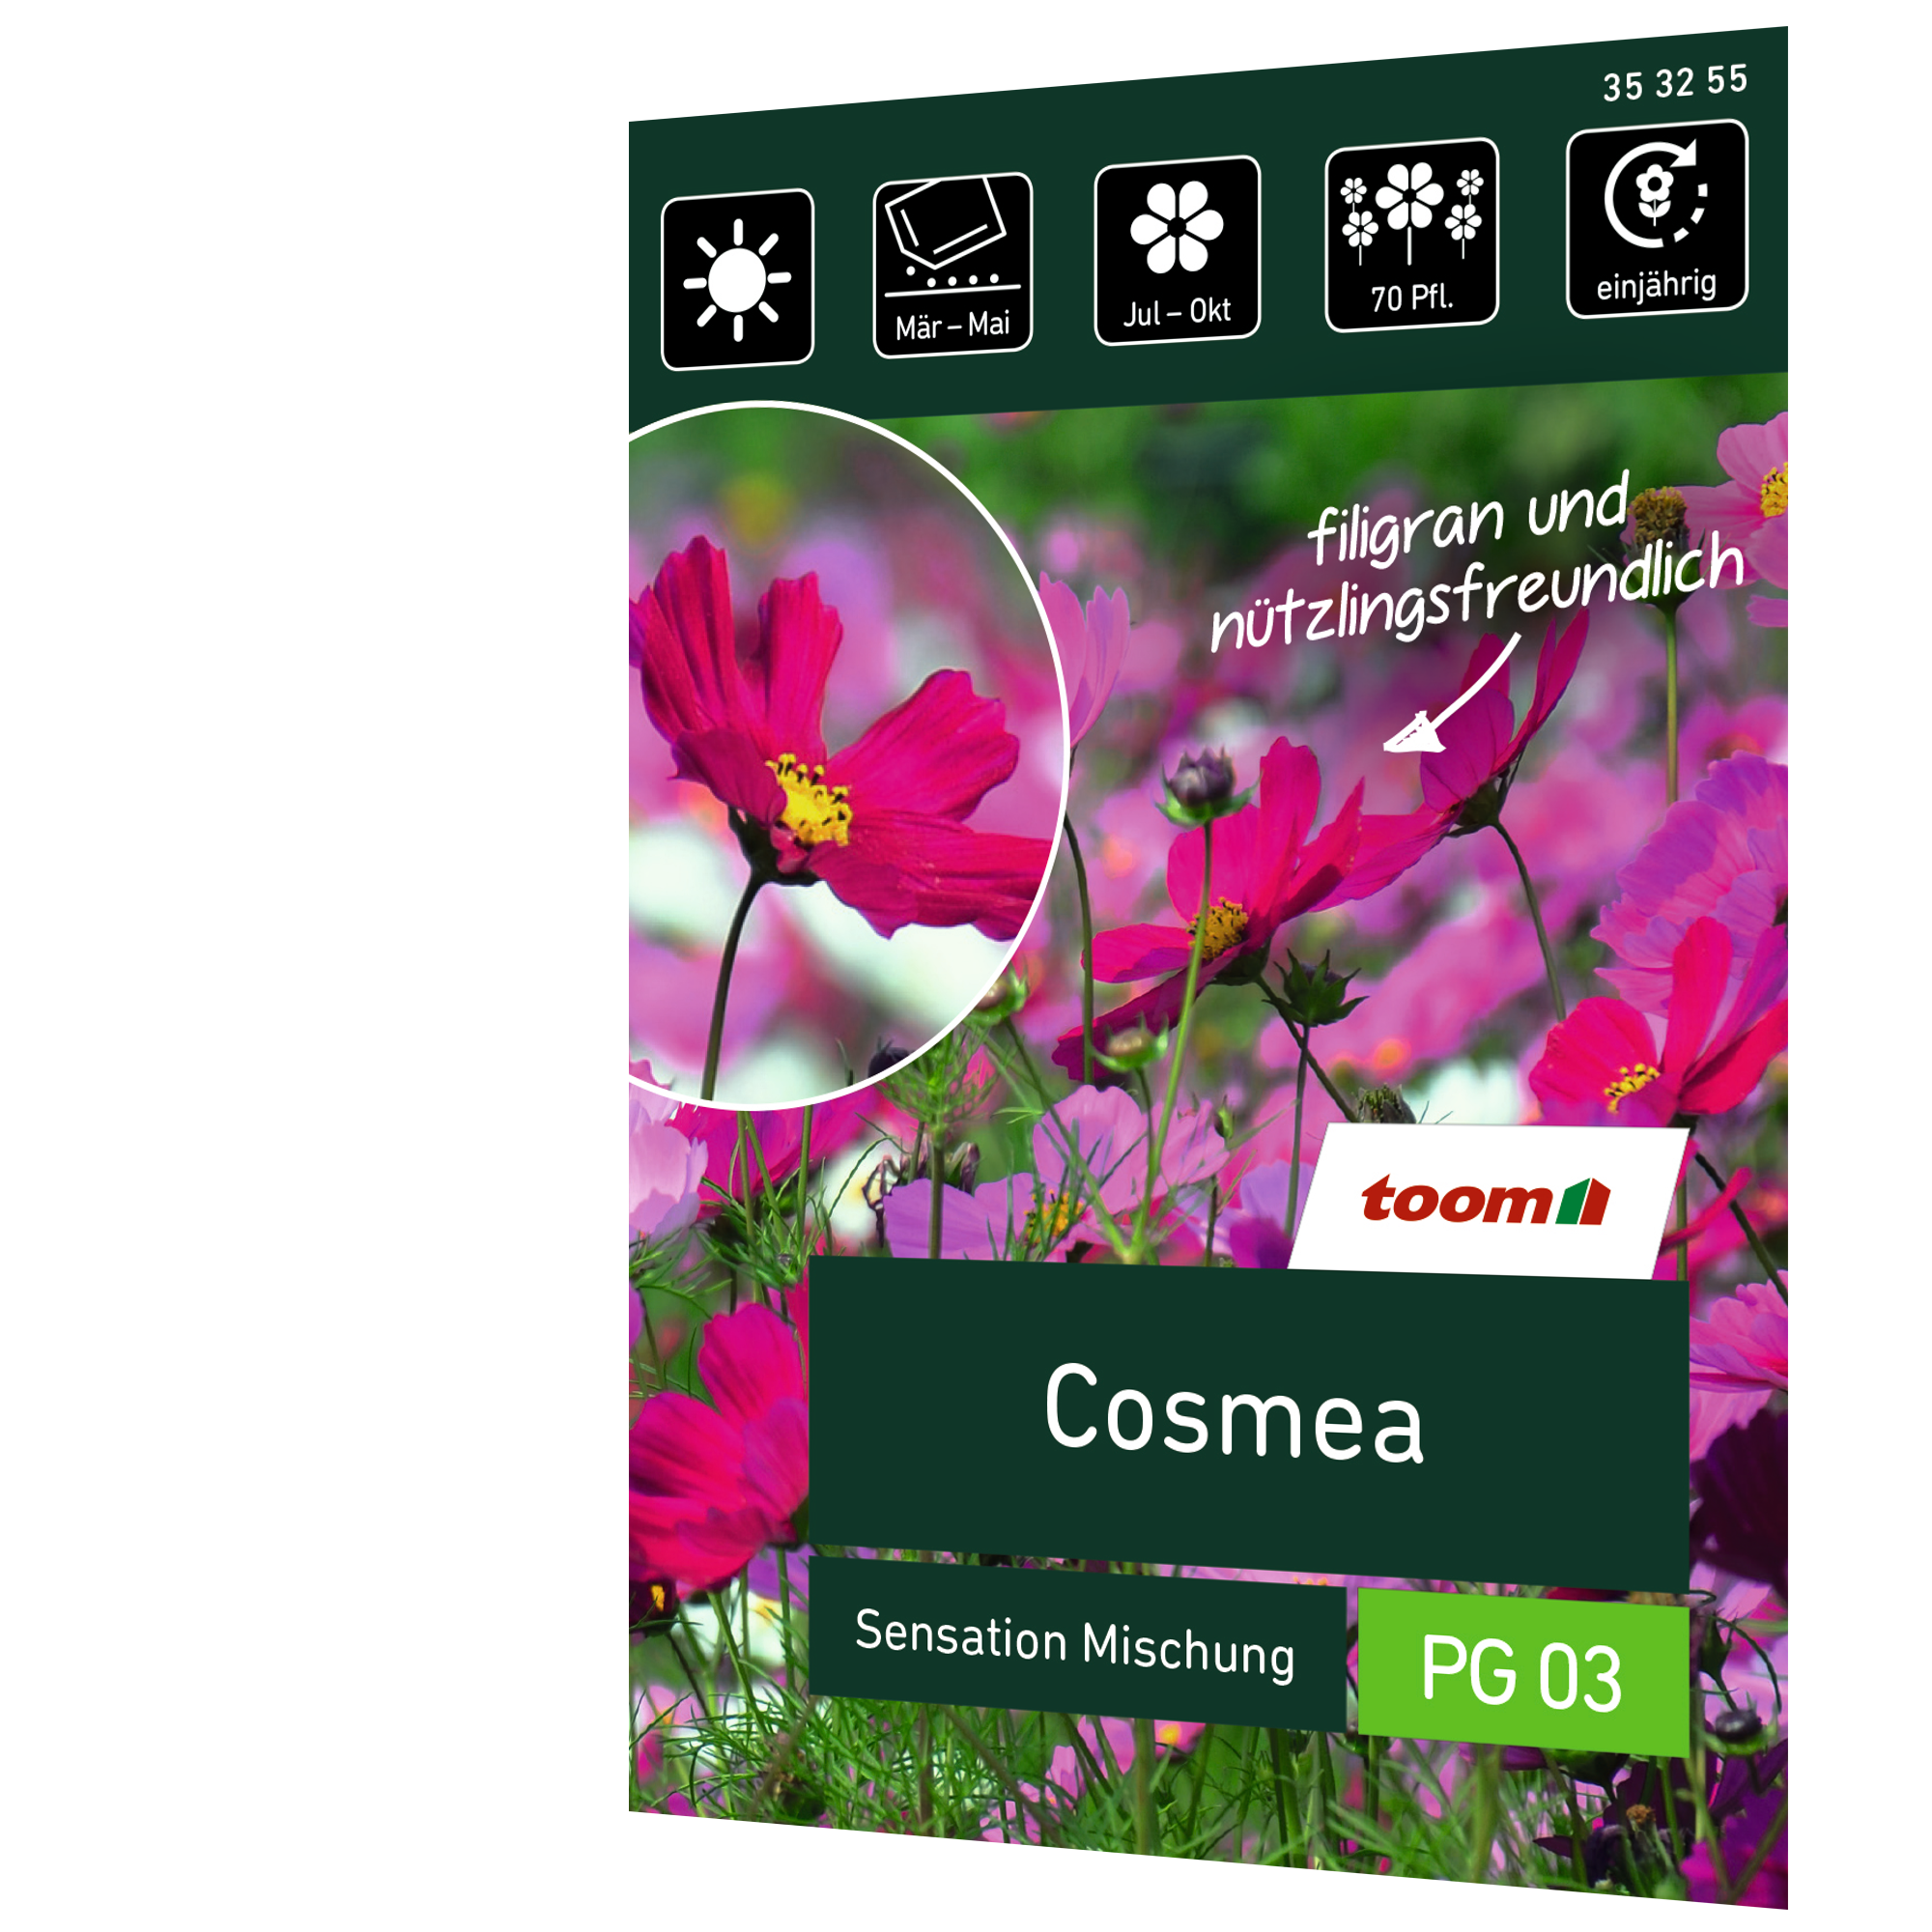 Cosmea 'Sensation Mischung' + product picture